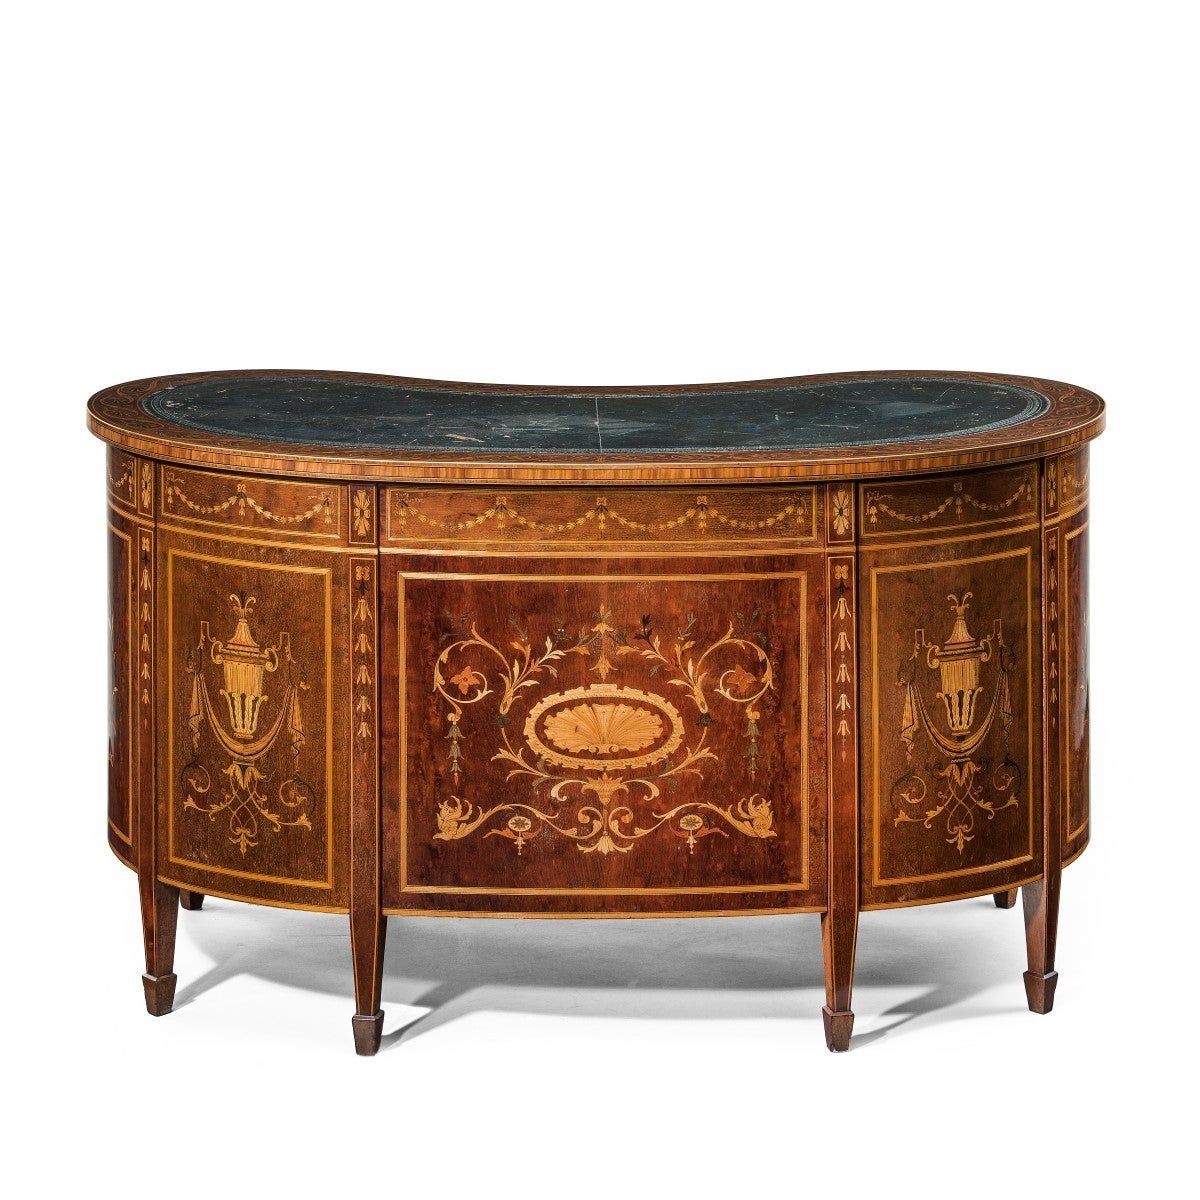 A fine freestanding kidney shaped mahogany desk by Druce & Co, decorated overall in satinwood marquetry and crossbanding with an acanthus wave scroll, harebells, classical urns and a stylized central shell motif. With a plate inscribed Druce & Co,